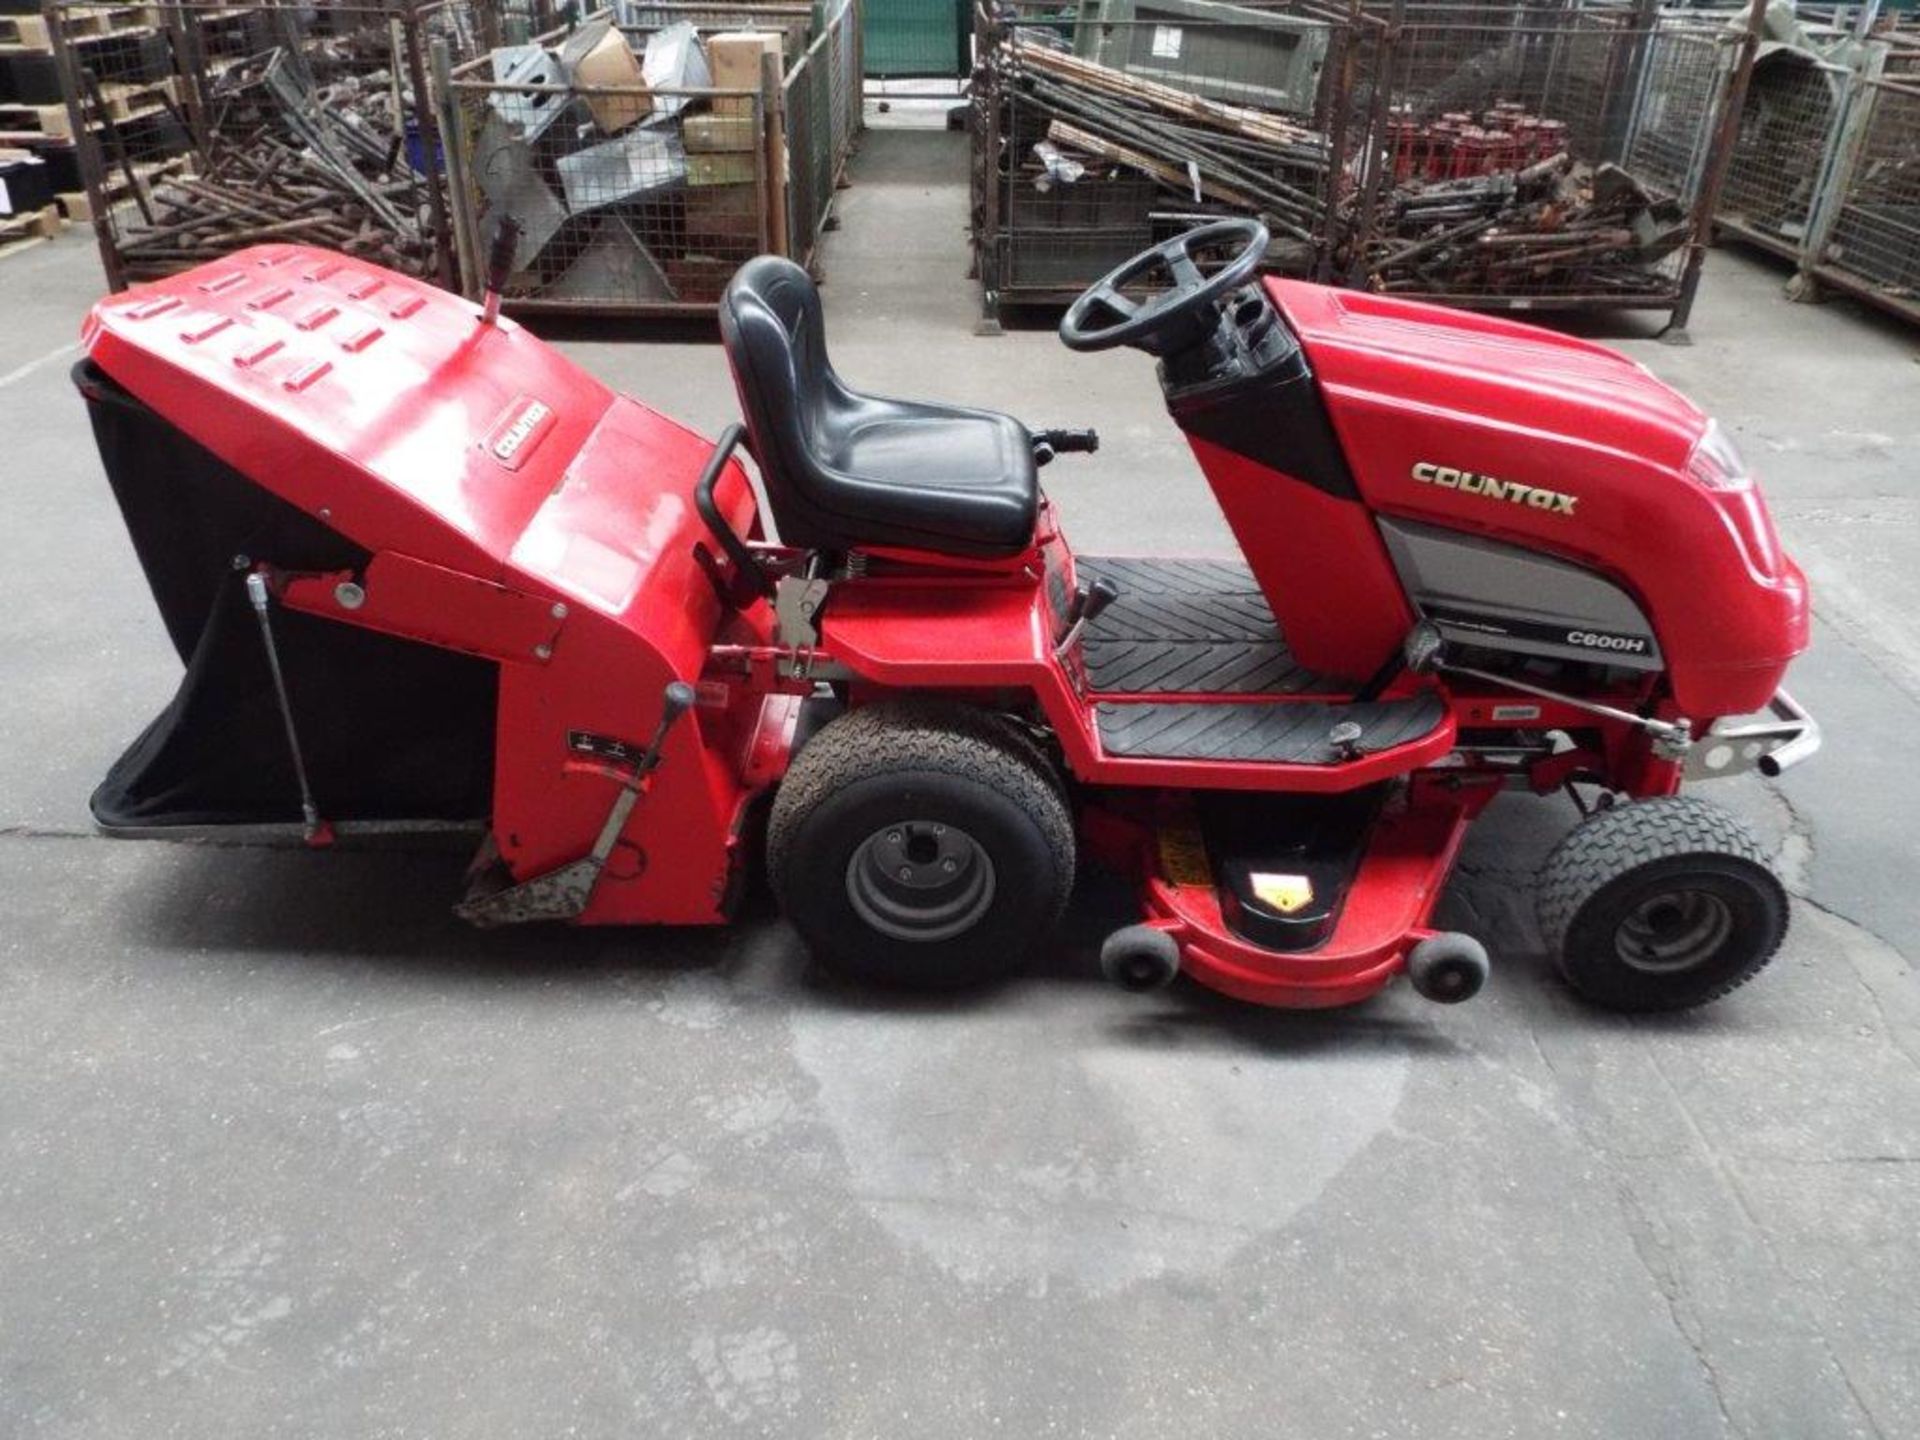 Countax C600H Ride On Mower with Rear Brush and Grass Collector - Bild 8 aus 22